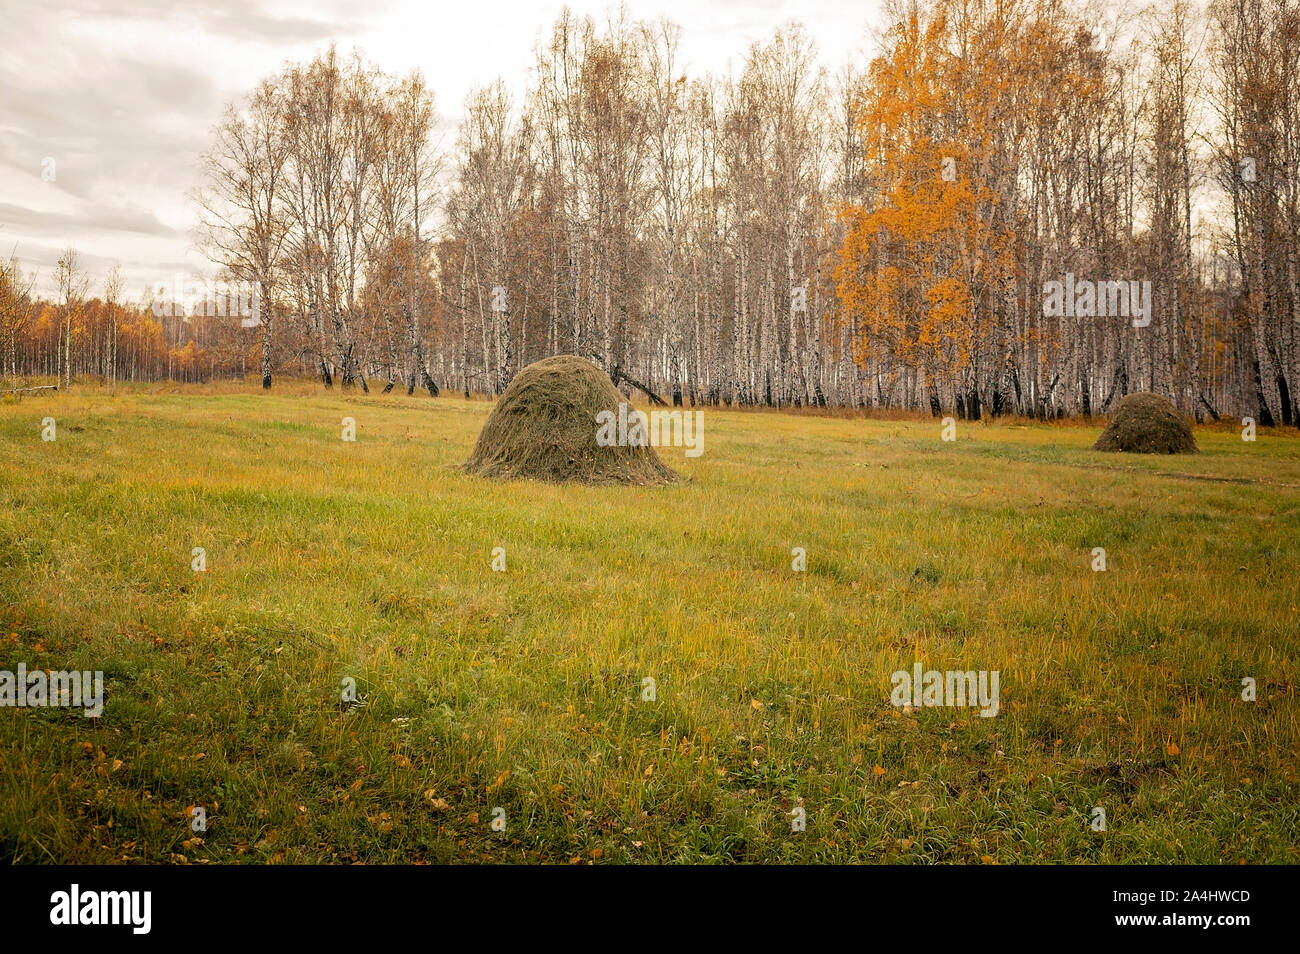 Rural landscape. Haystacks on a background autumn forest. Food for wild animals in winter. Wildlife Care Concept. Horizontal shot Stock Photo